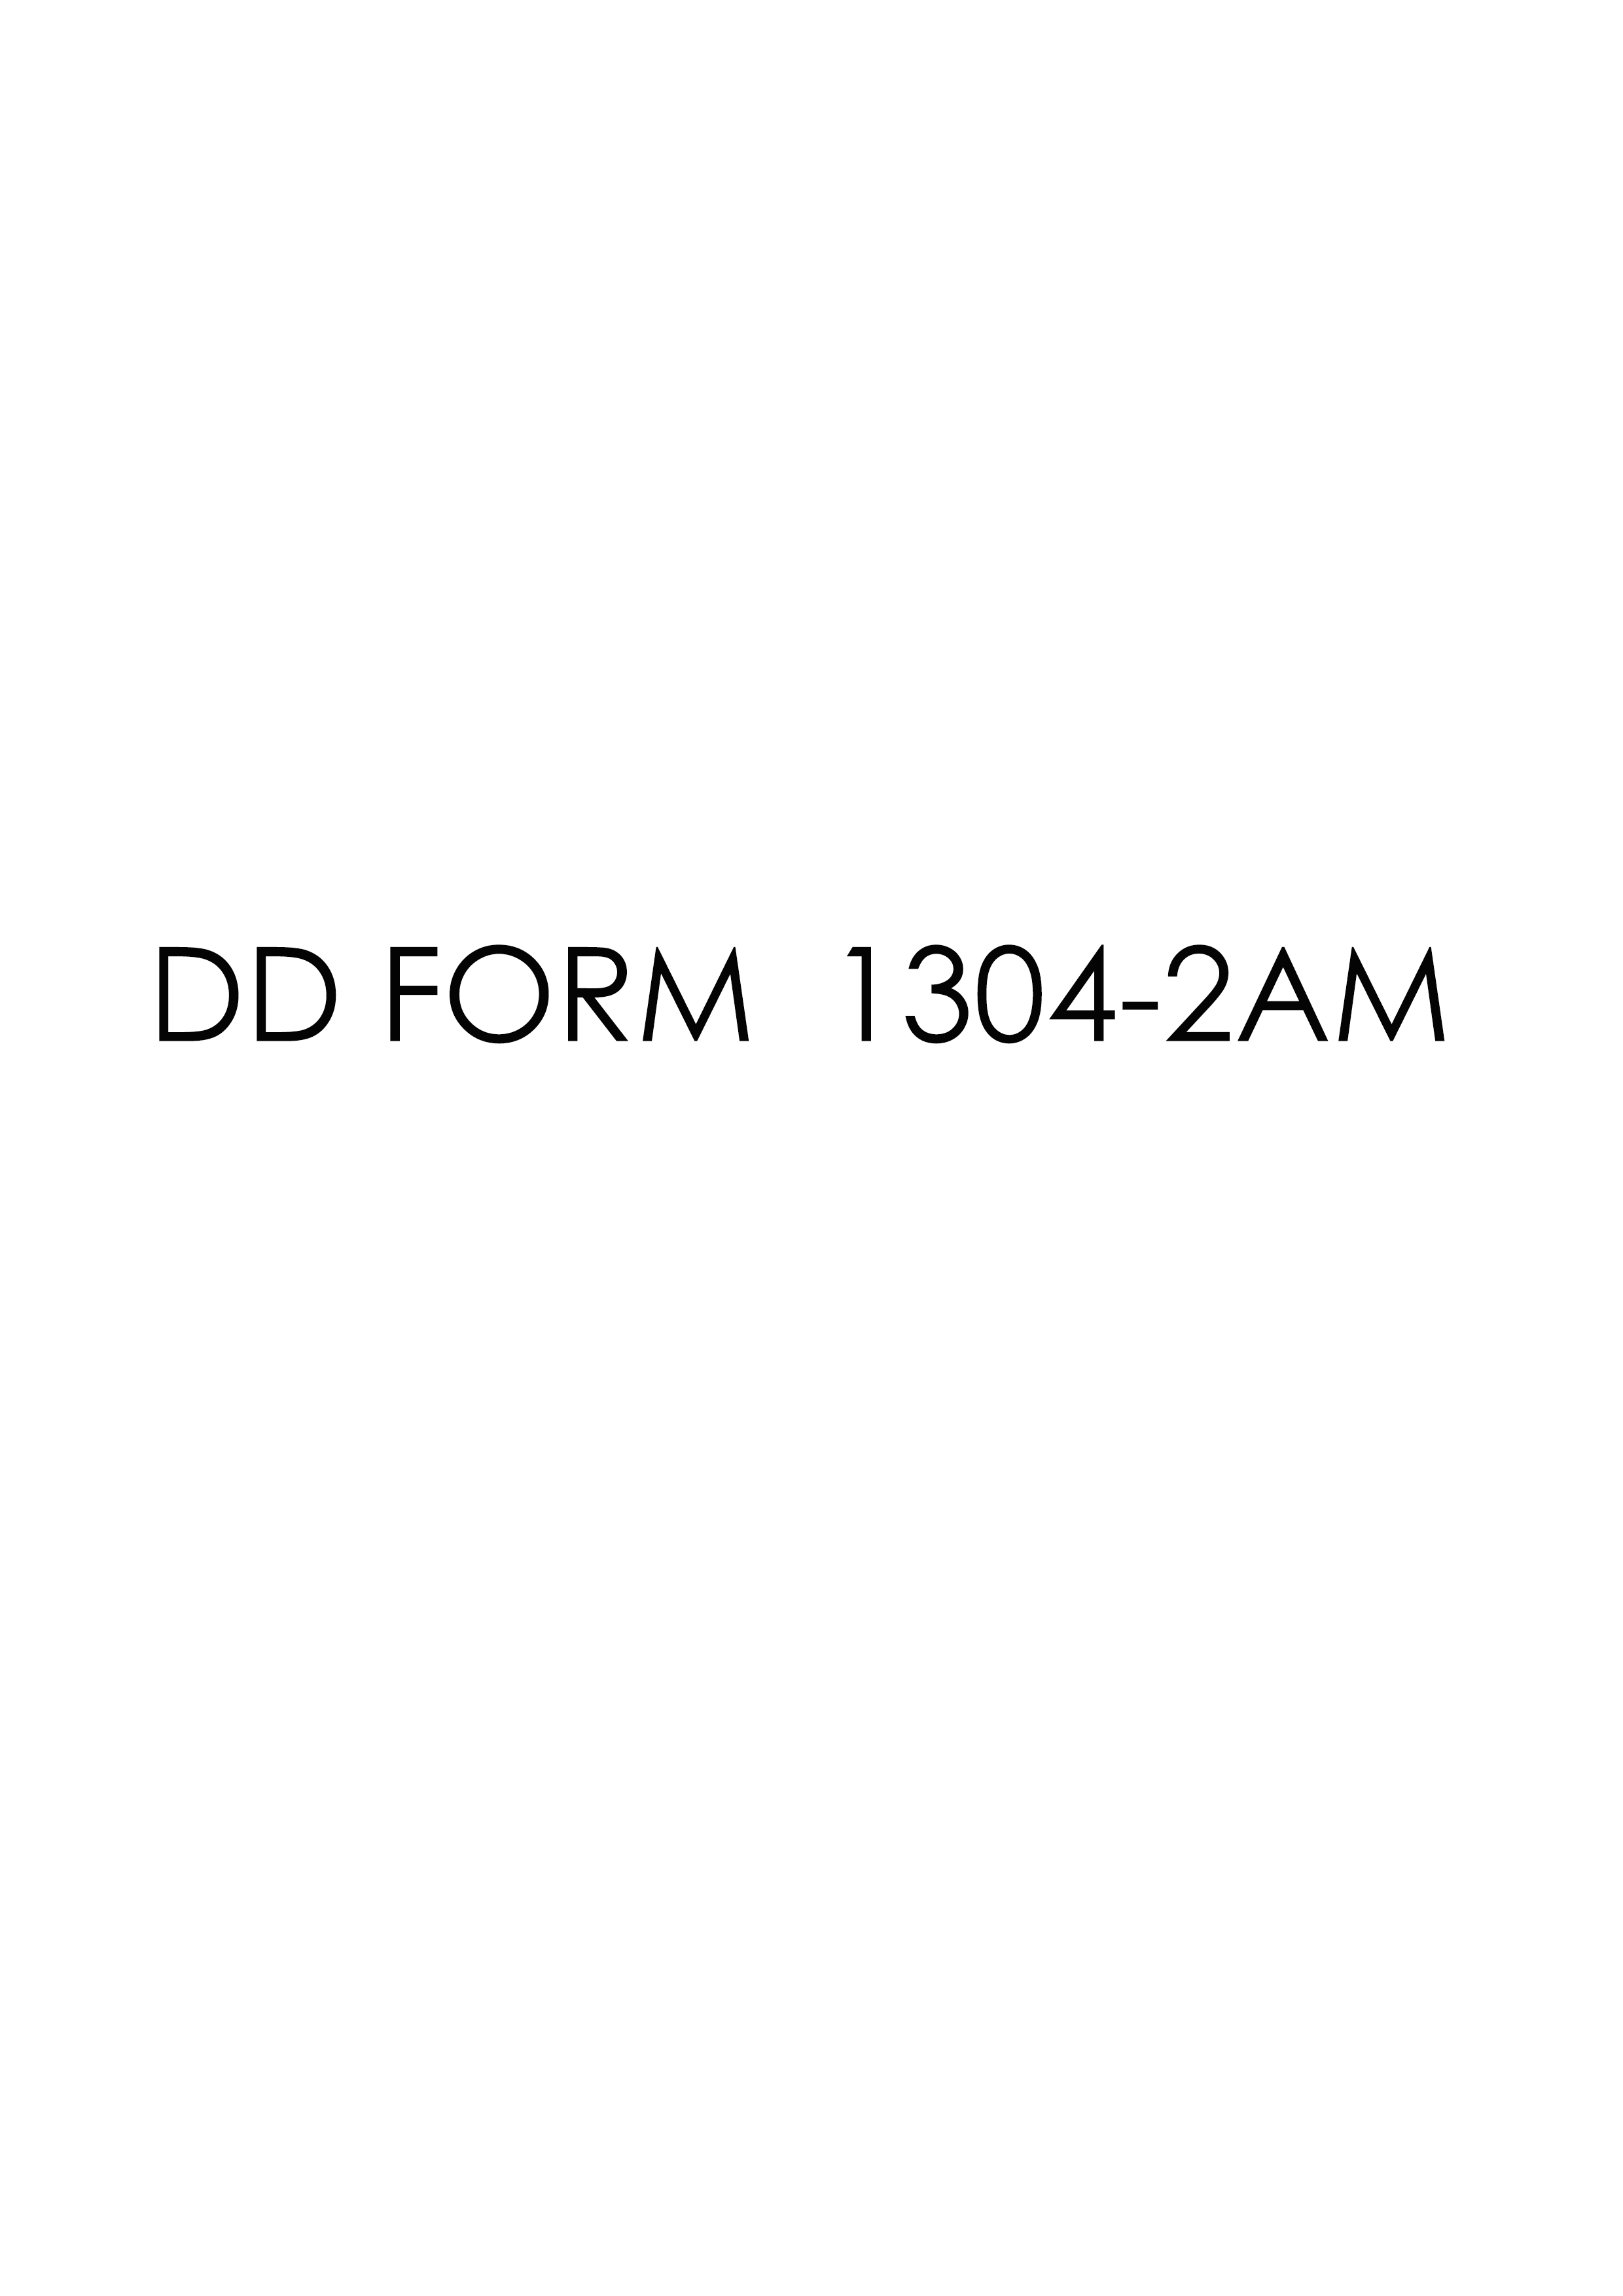 Download Fillable dd Form 1304-2AM